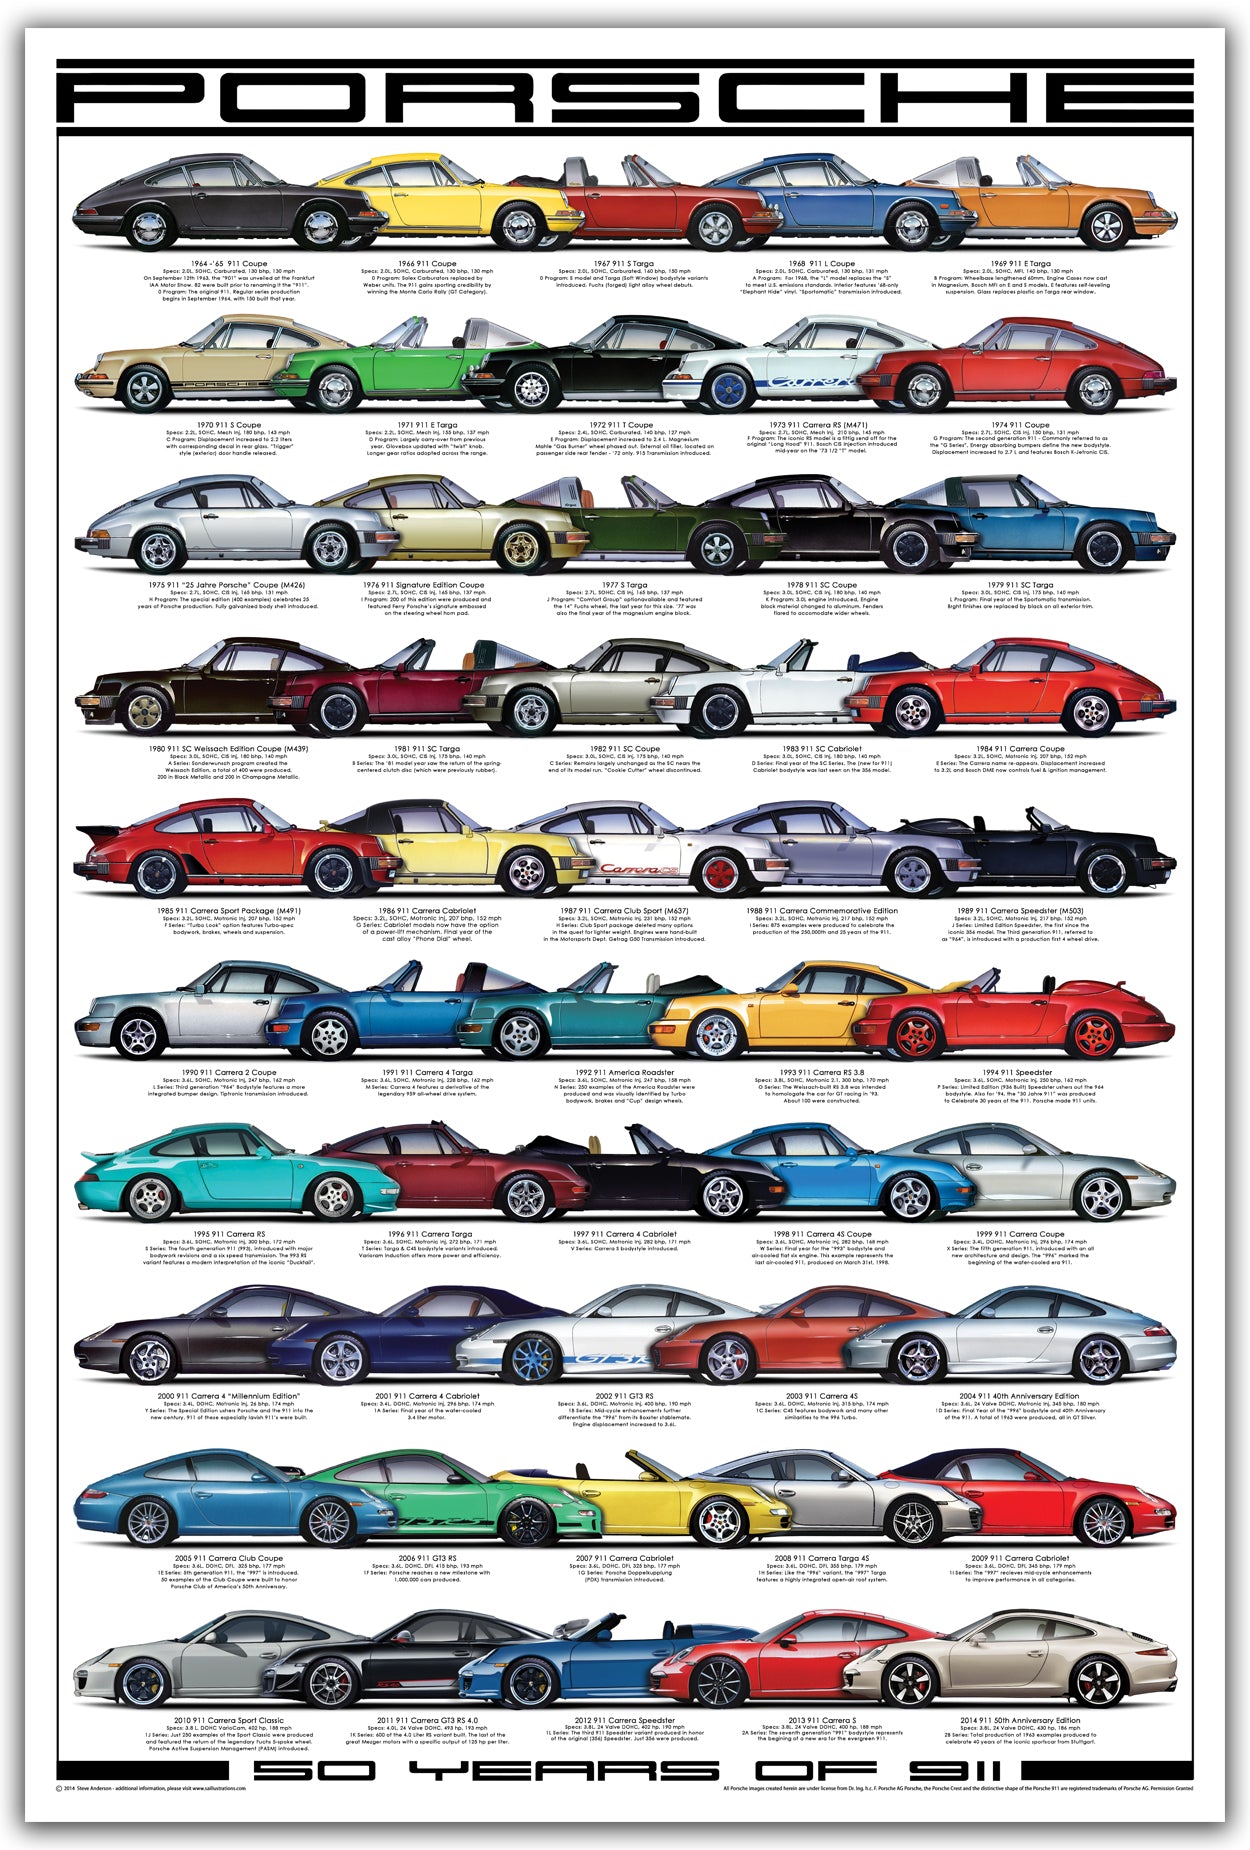 50 years of 911